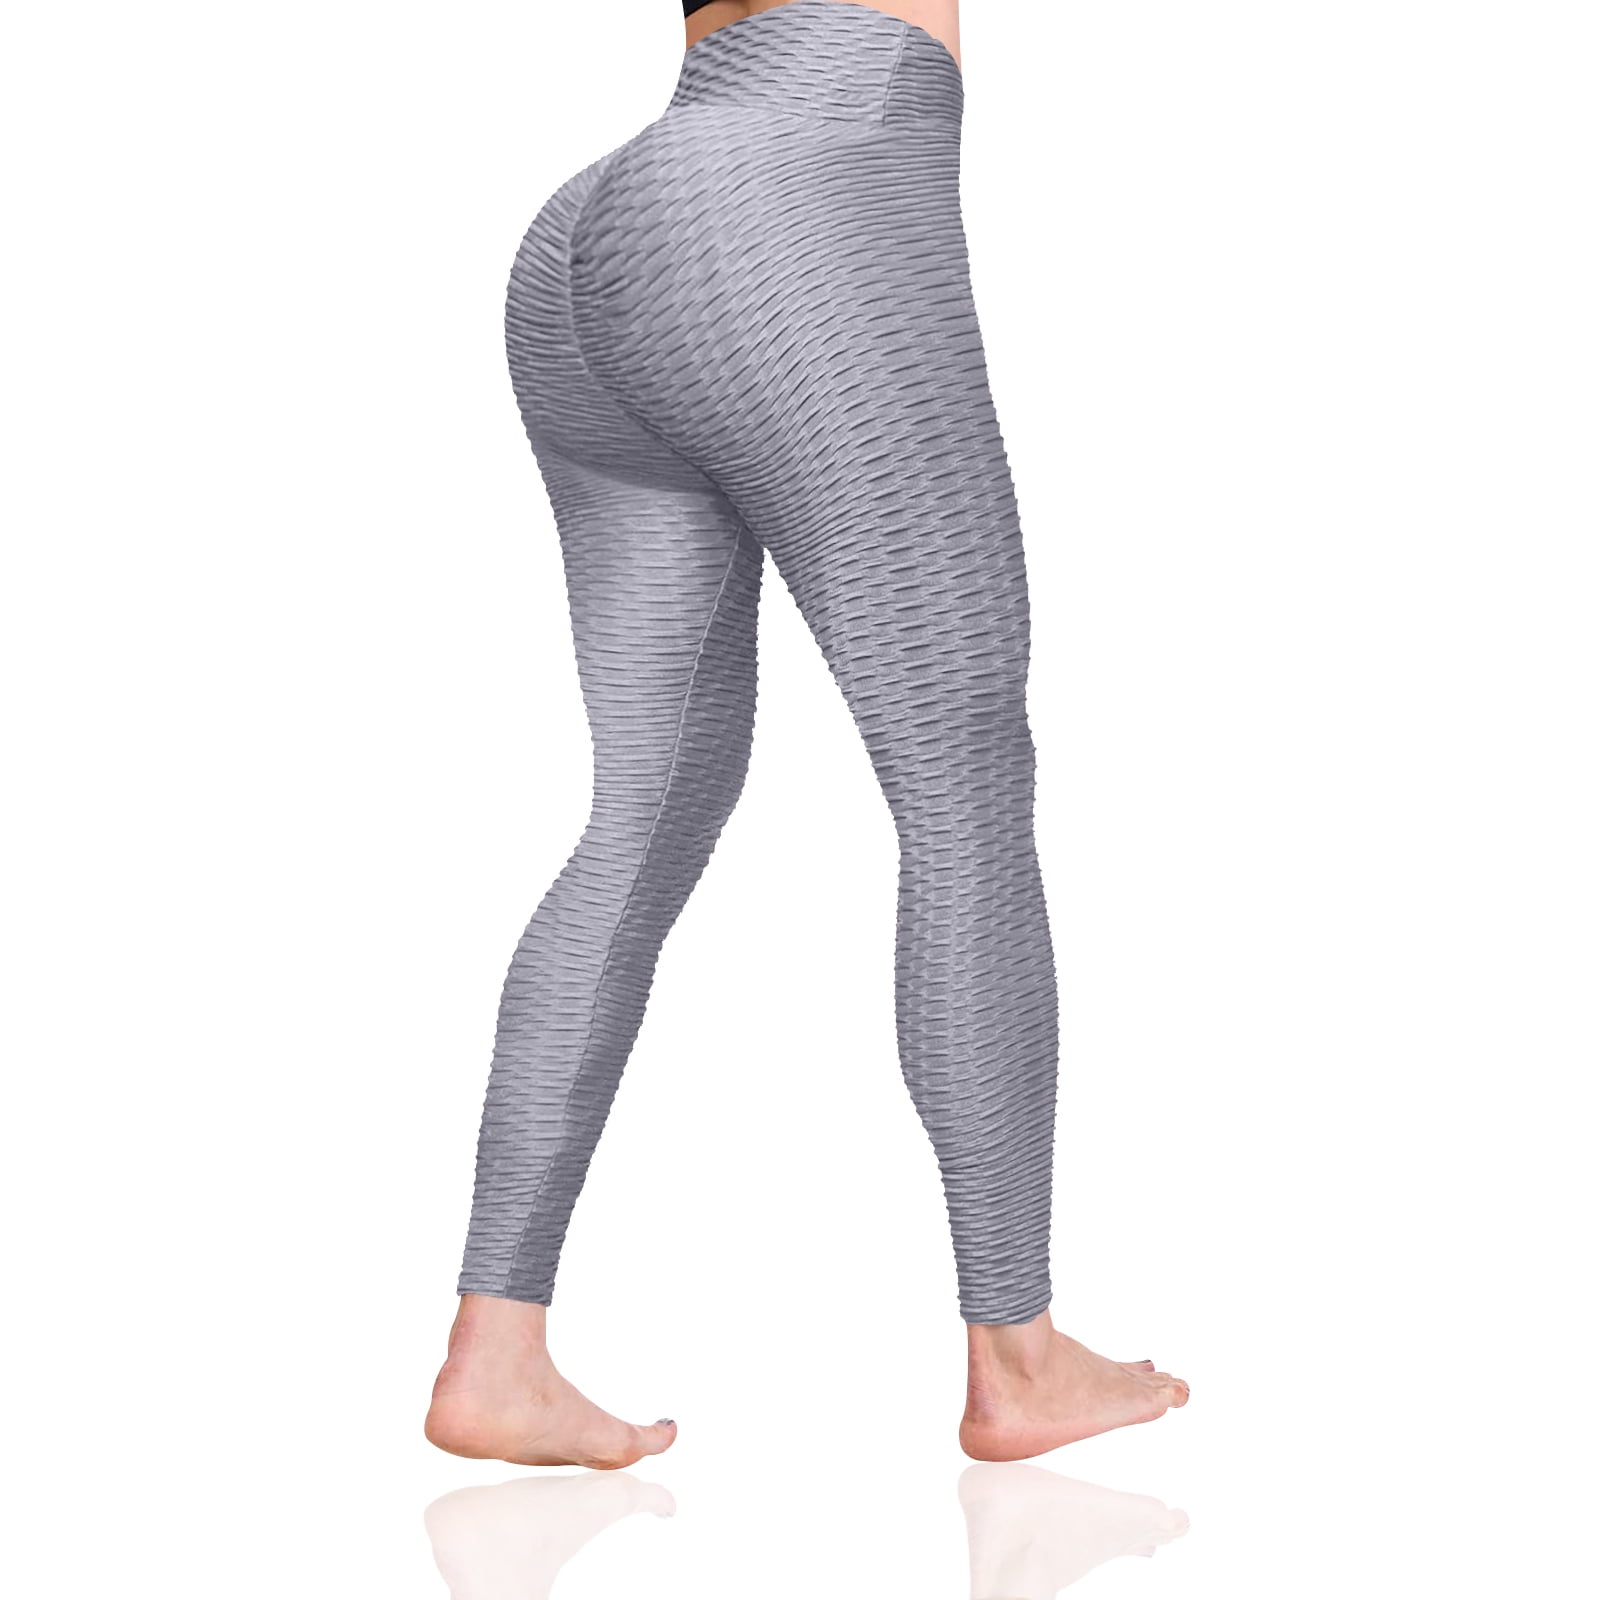 Canrulo Women Booty Legging Yoga Pants Bubble Butt Lifting Workout Tights  Grey XL 